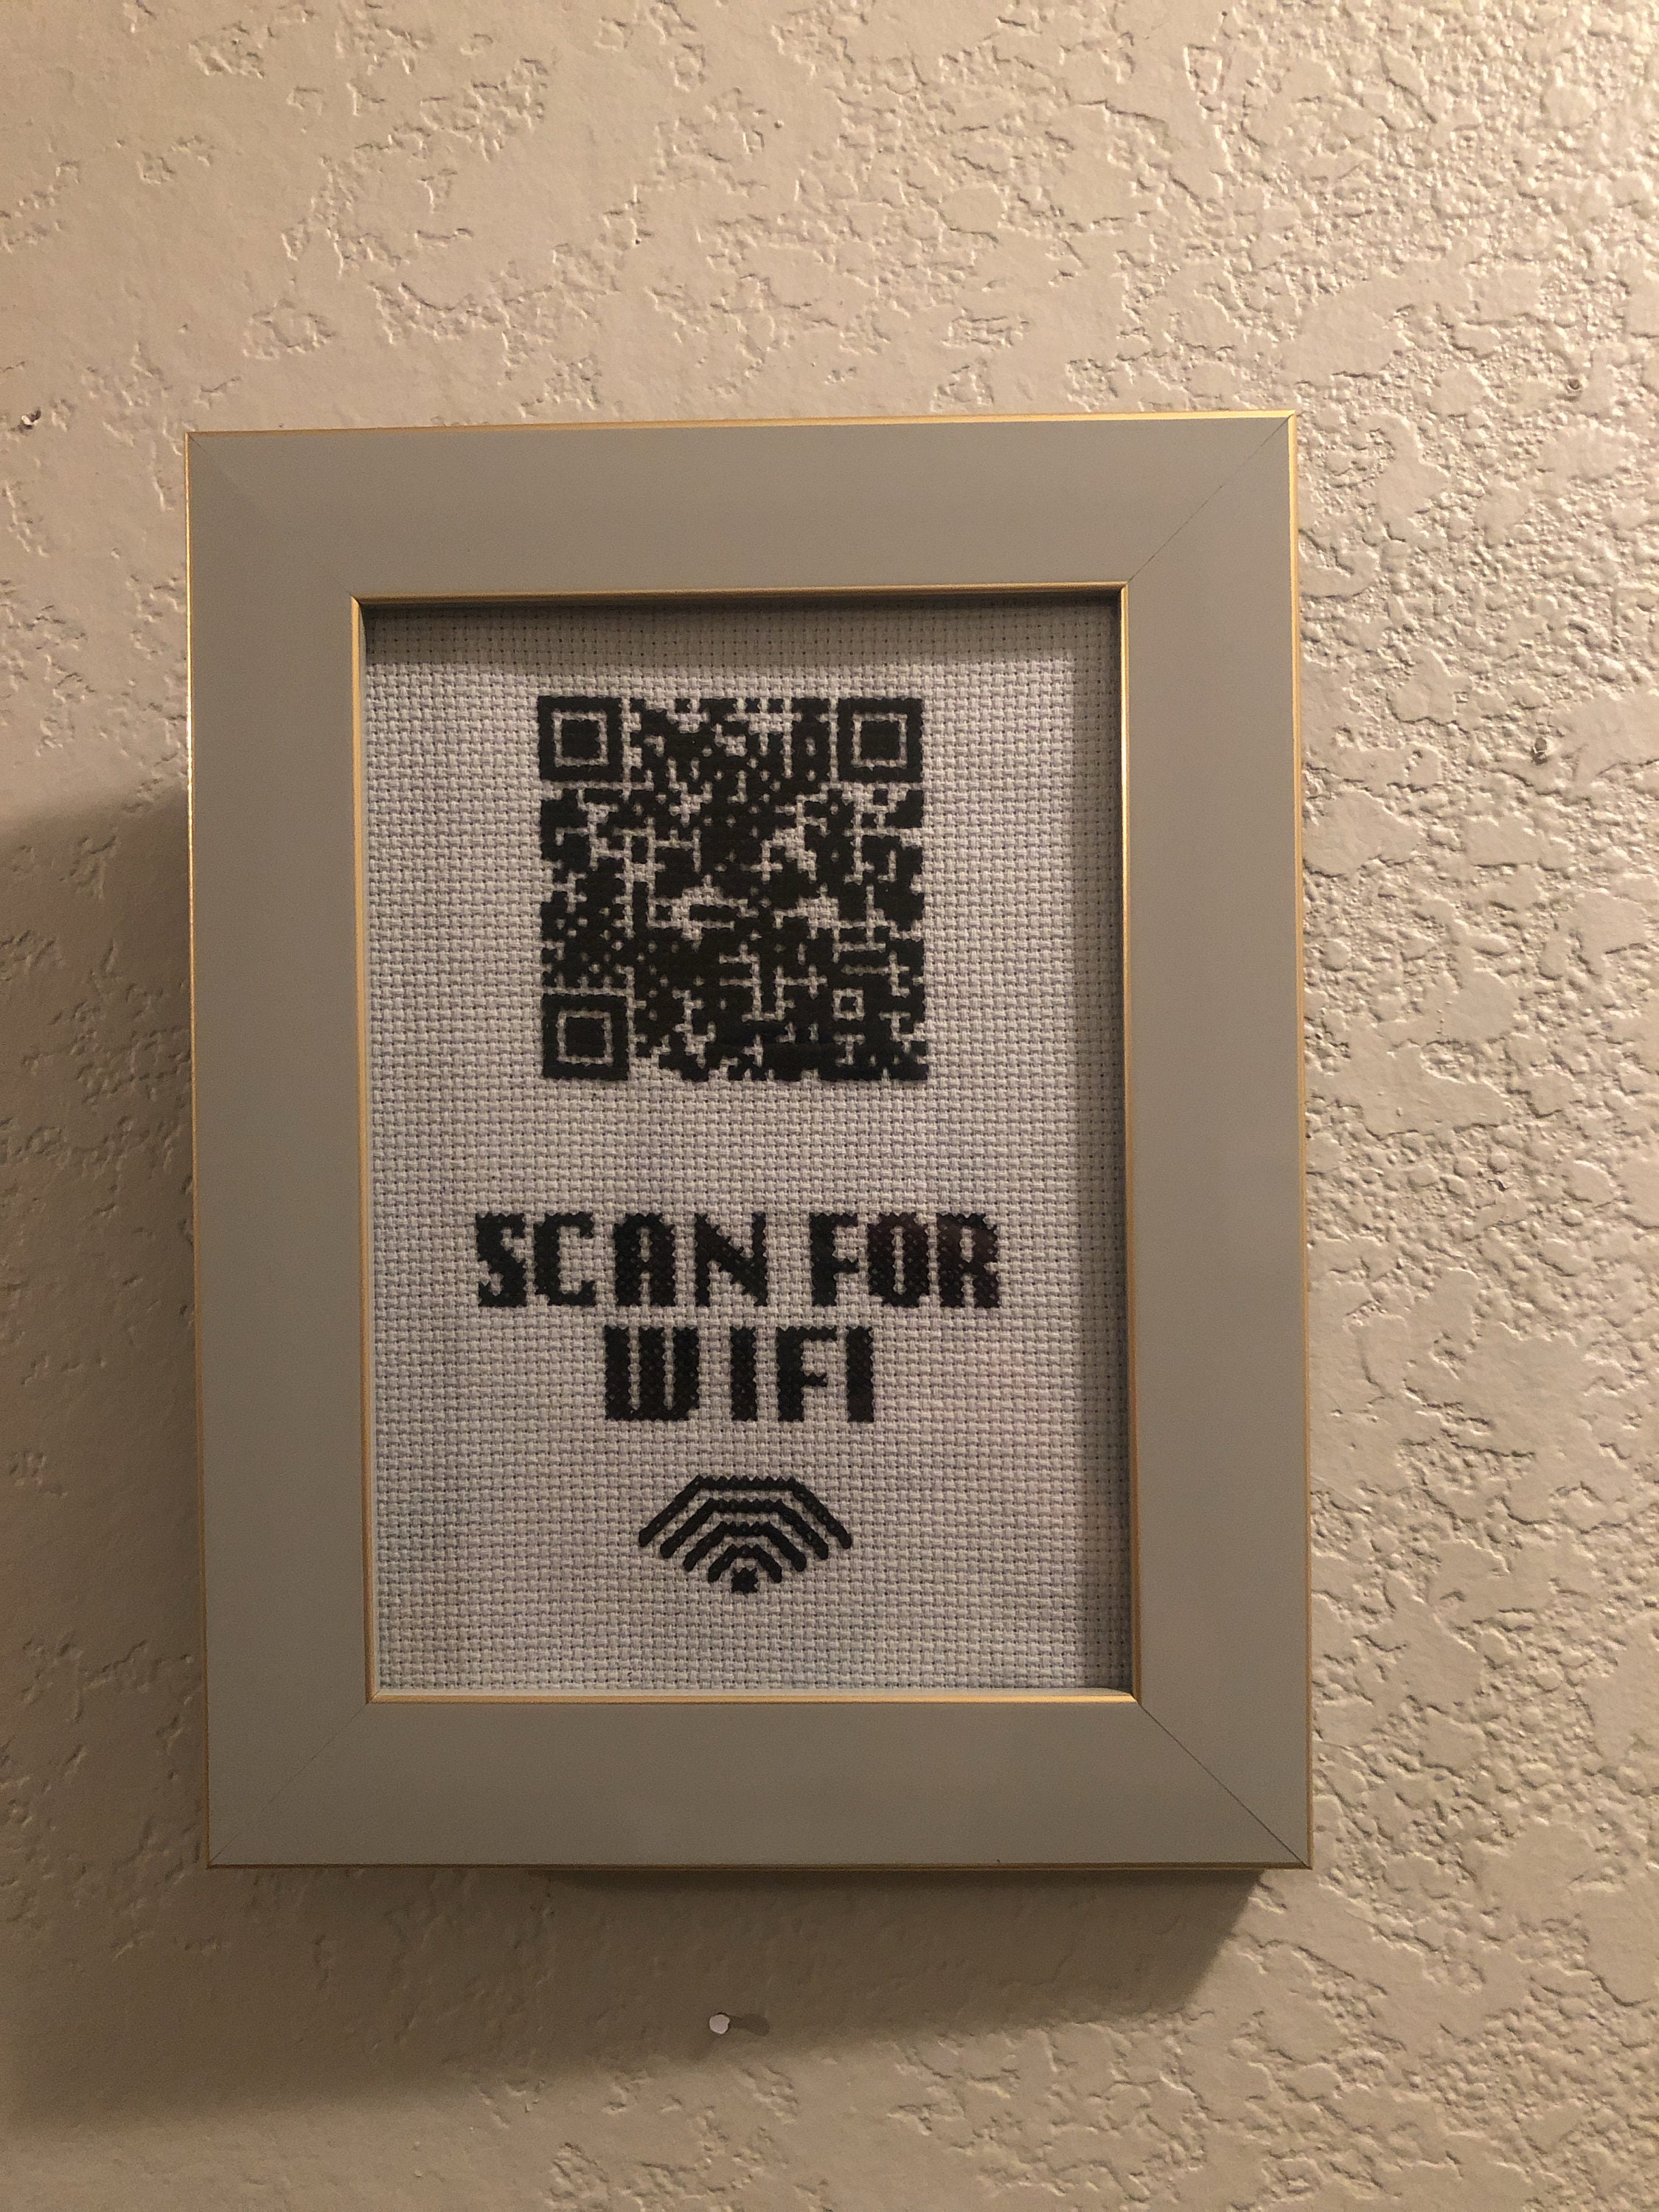 Rick Roll QR code disguised as bitcoin QR code Postcard for Sale